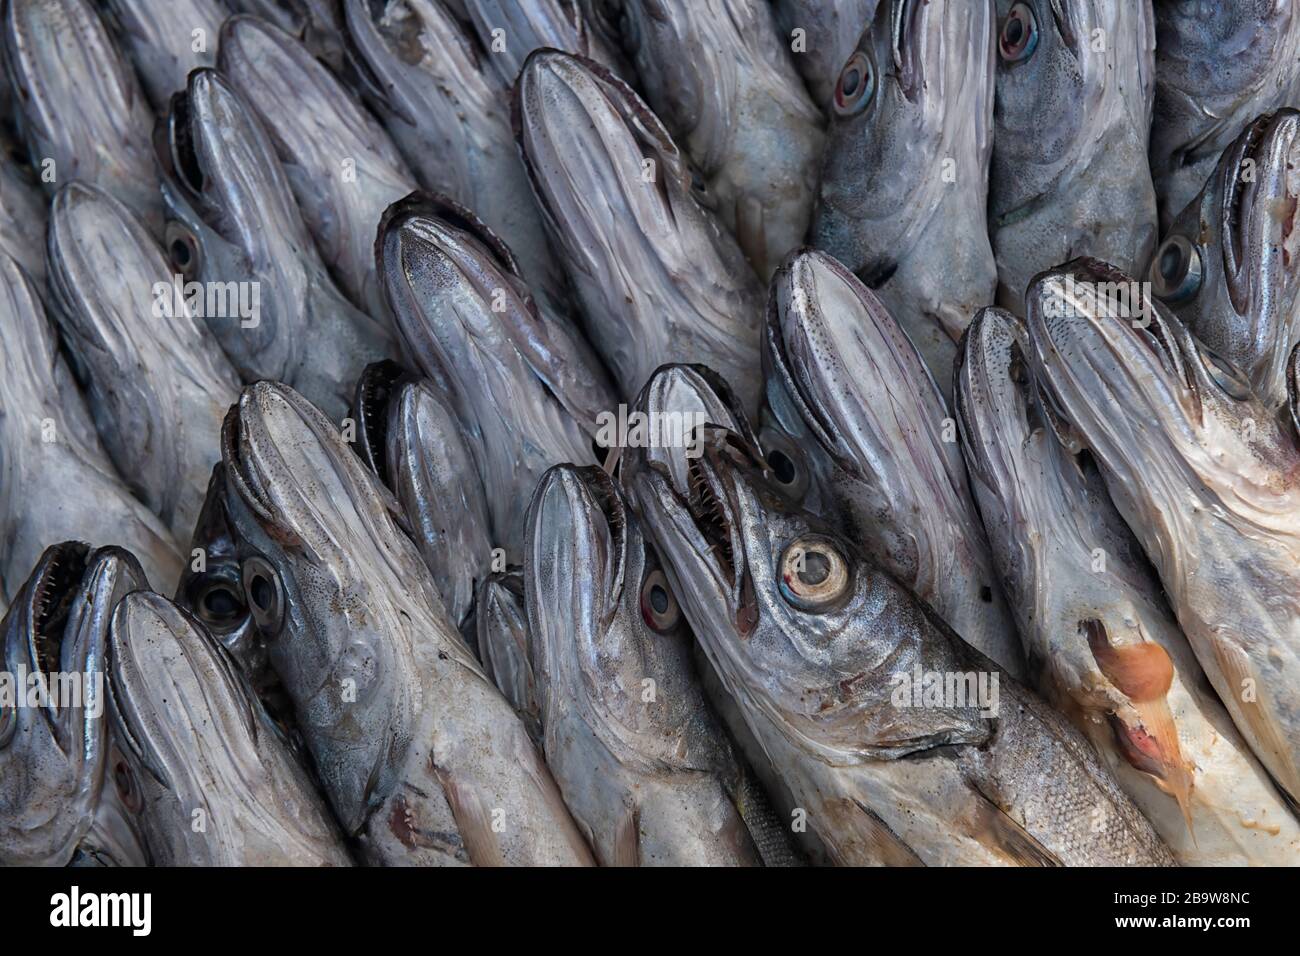 Merling or whiting fish at the fish market of Essaouira, Morocco. Stock Photo